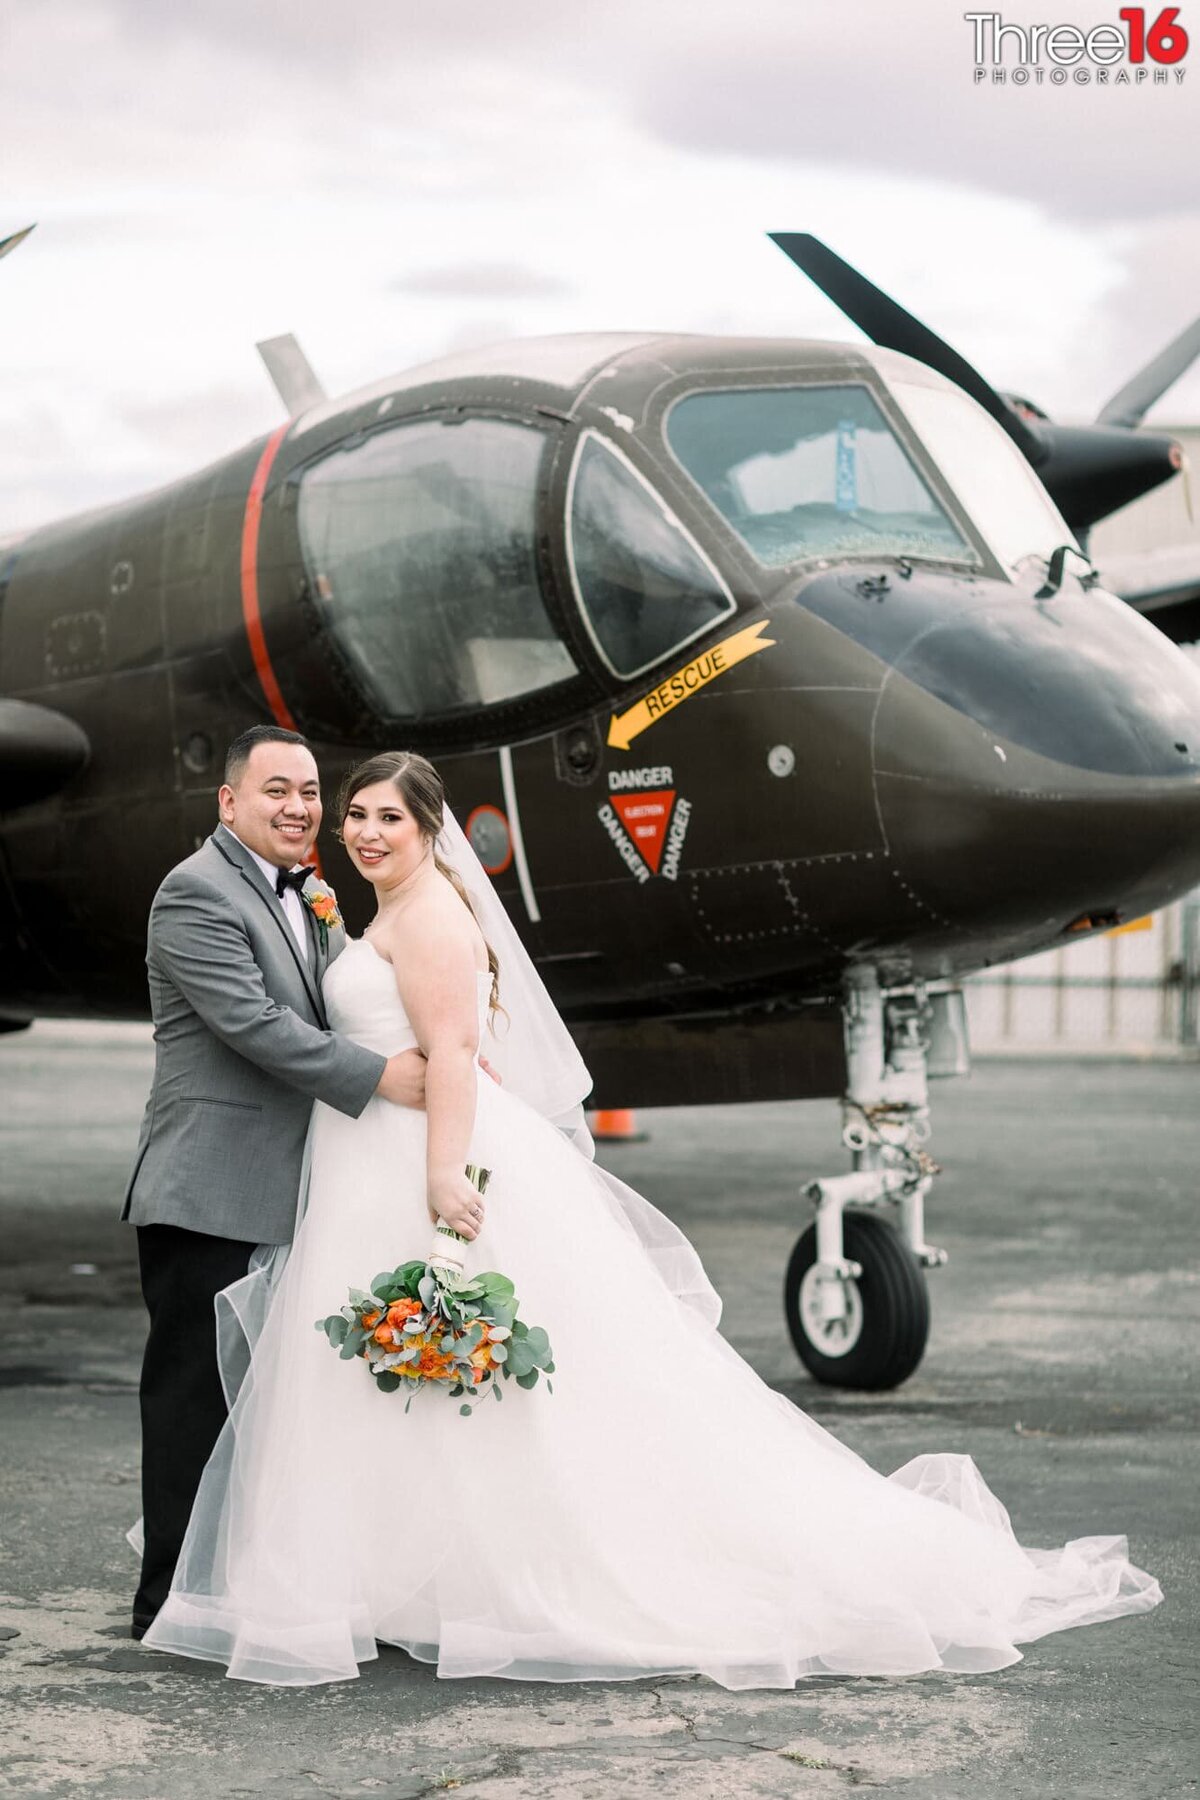 Bride and Groom pose for photos in front of a plane as the Groom holds his Bride